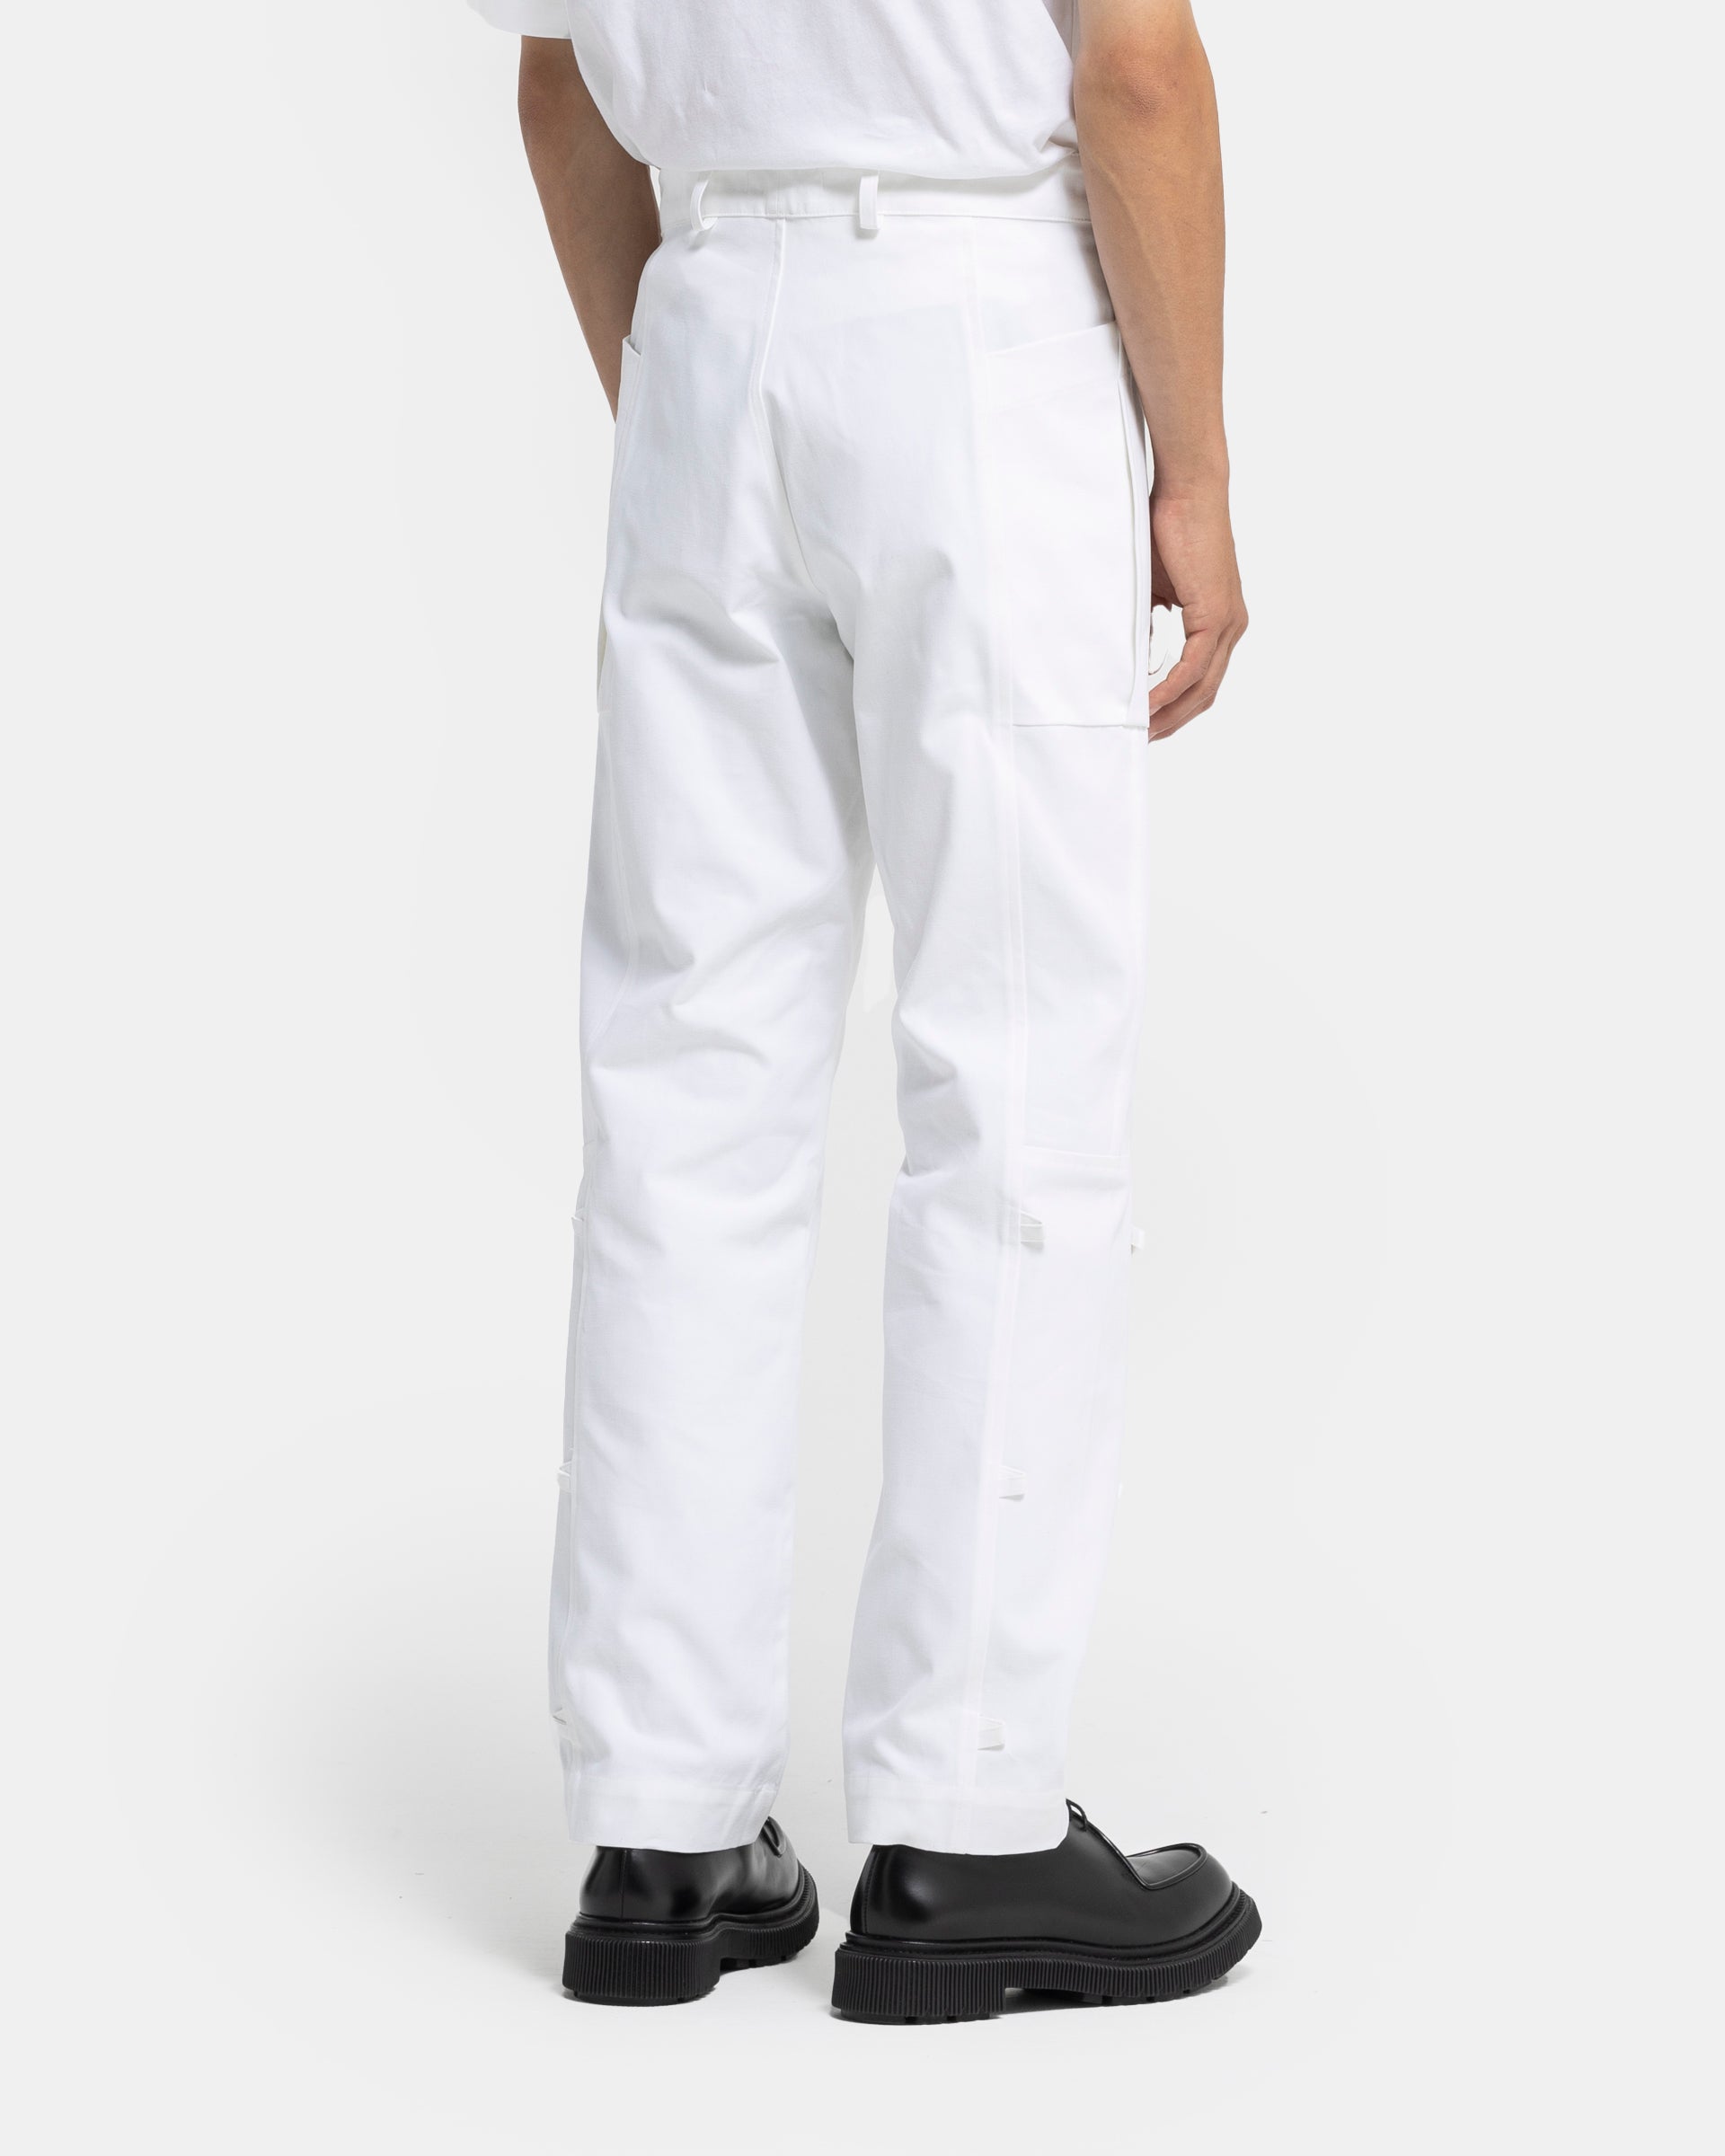 Chippie Trousers in White